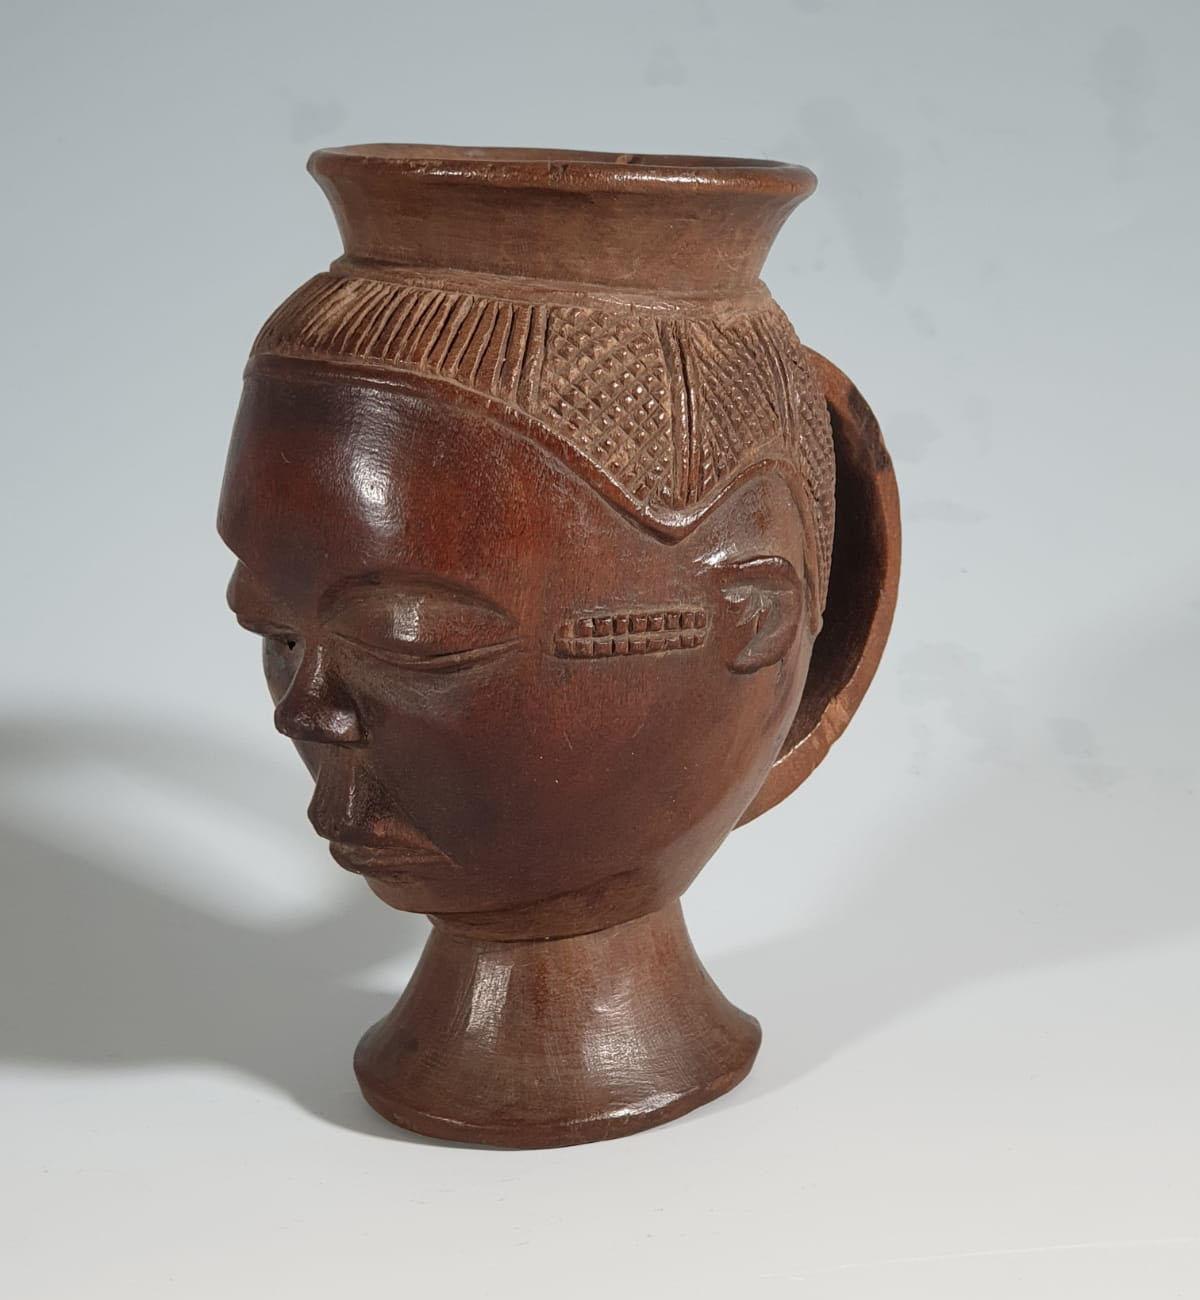 Fine rare Pende palm wine Cup Congo 
These finely carved cups would have been used at celebratory rituals and Wedding feasts 
Period: early 20th century 
Measure: Height 15 cm
Provenance: Belgian Colonial collection, Alain Guisson Brussels.